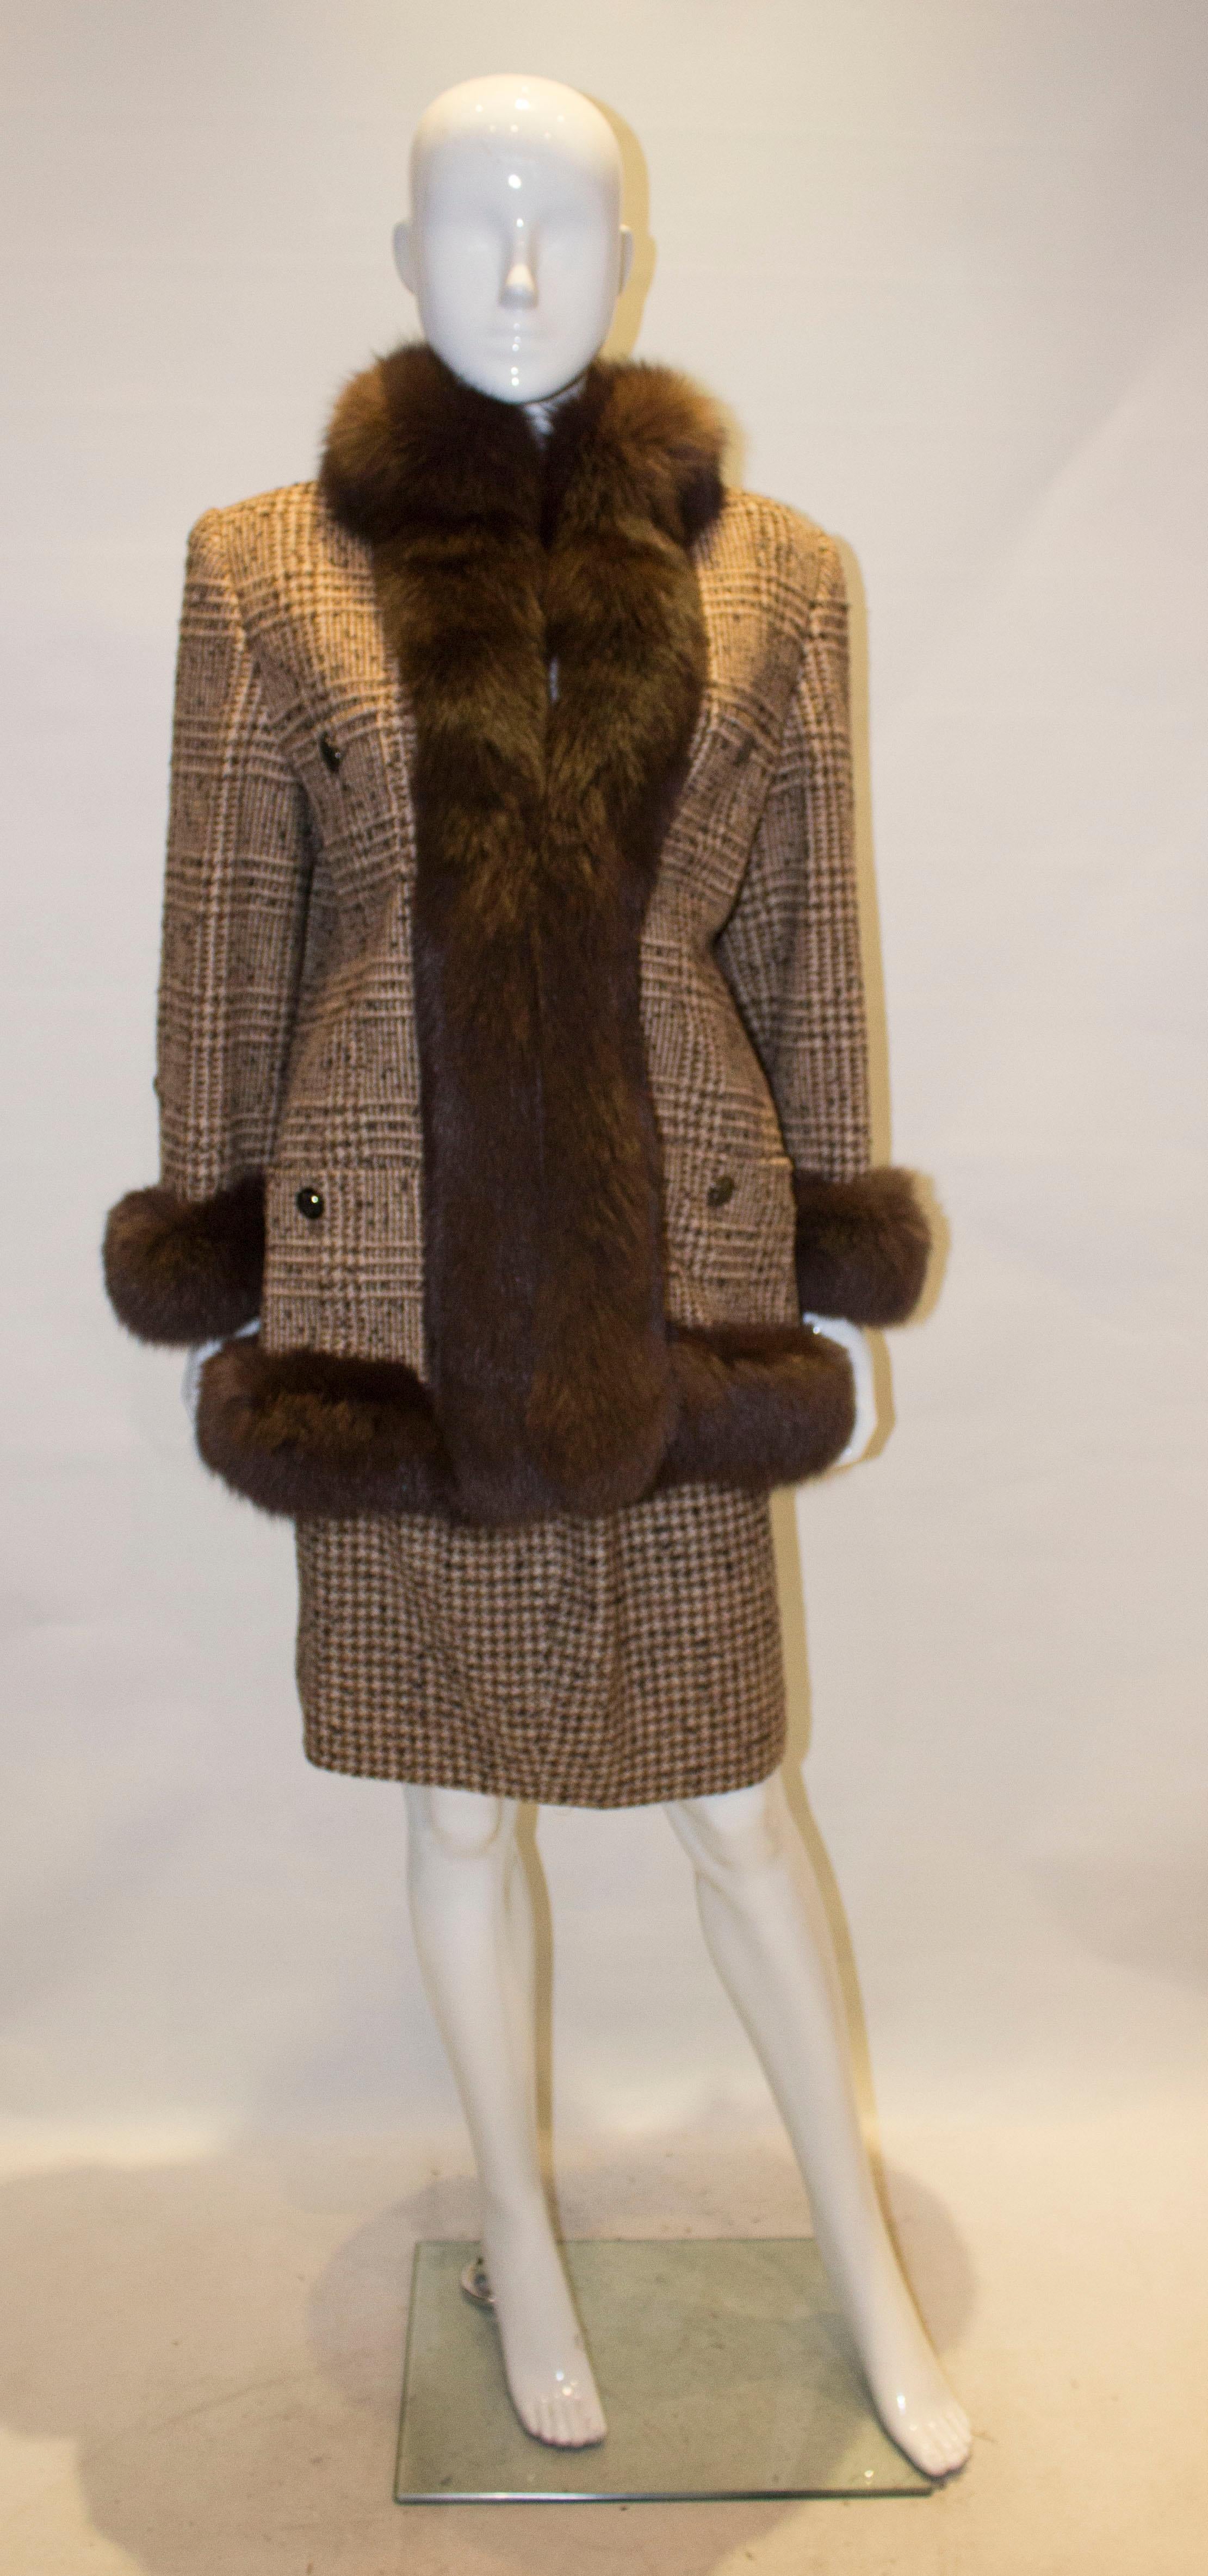 An indulgent vintage skirt suit in a brown and white wool ( 80% alpaca, 20% wool), with fox fur trim. The jacket has four pockets on the front , with no fastenings  but these could easily be added. It has fox fur cuffs and fur trim around the edge.